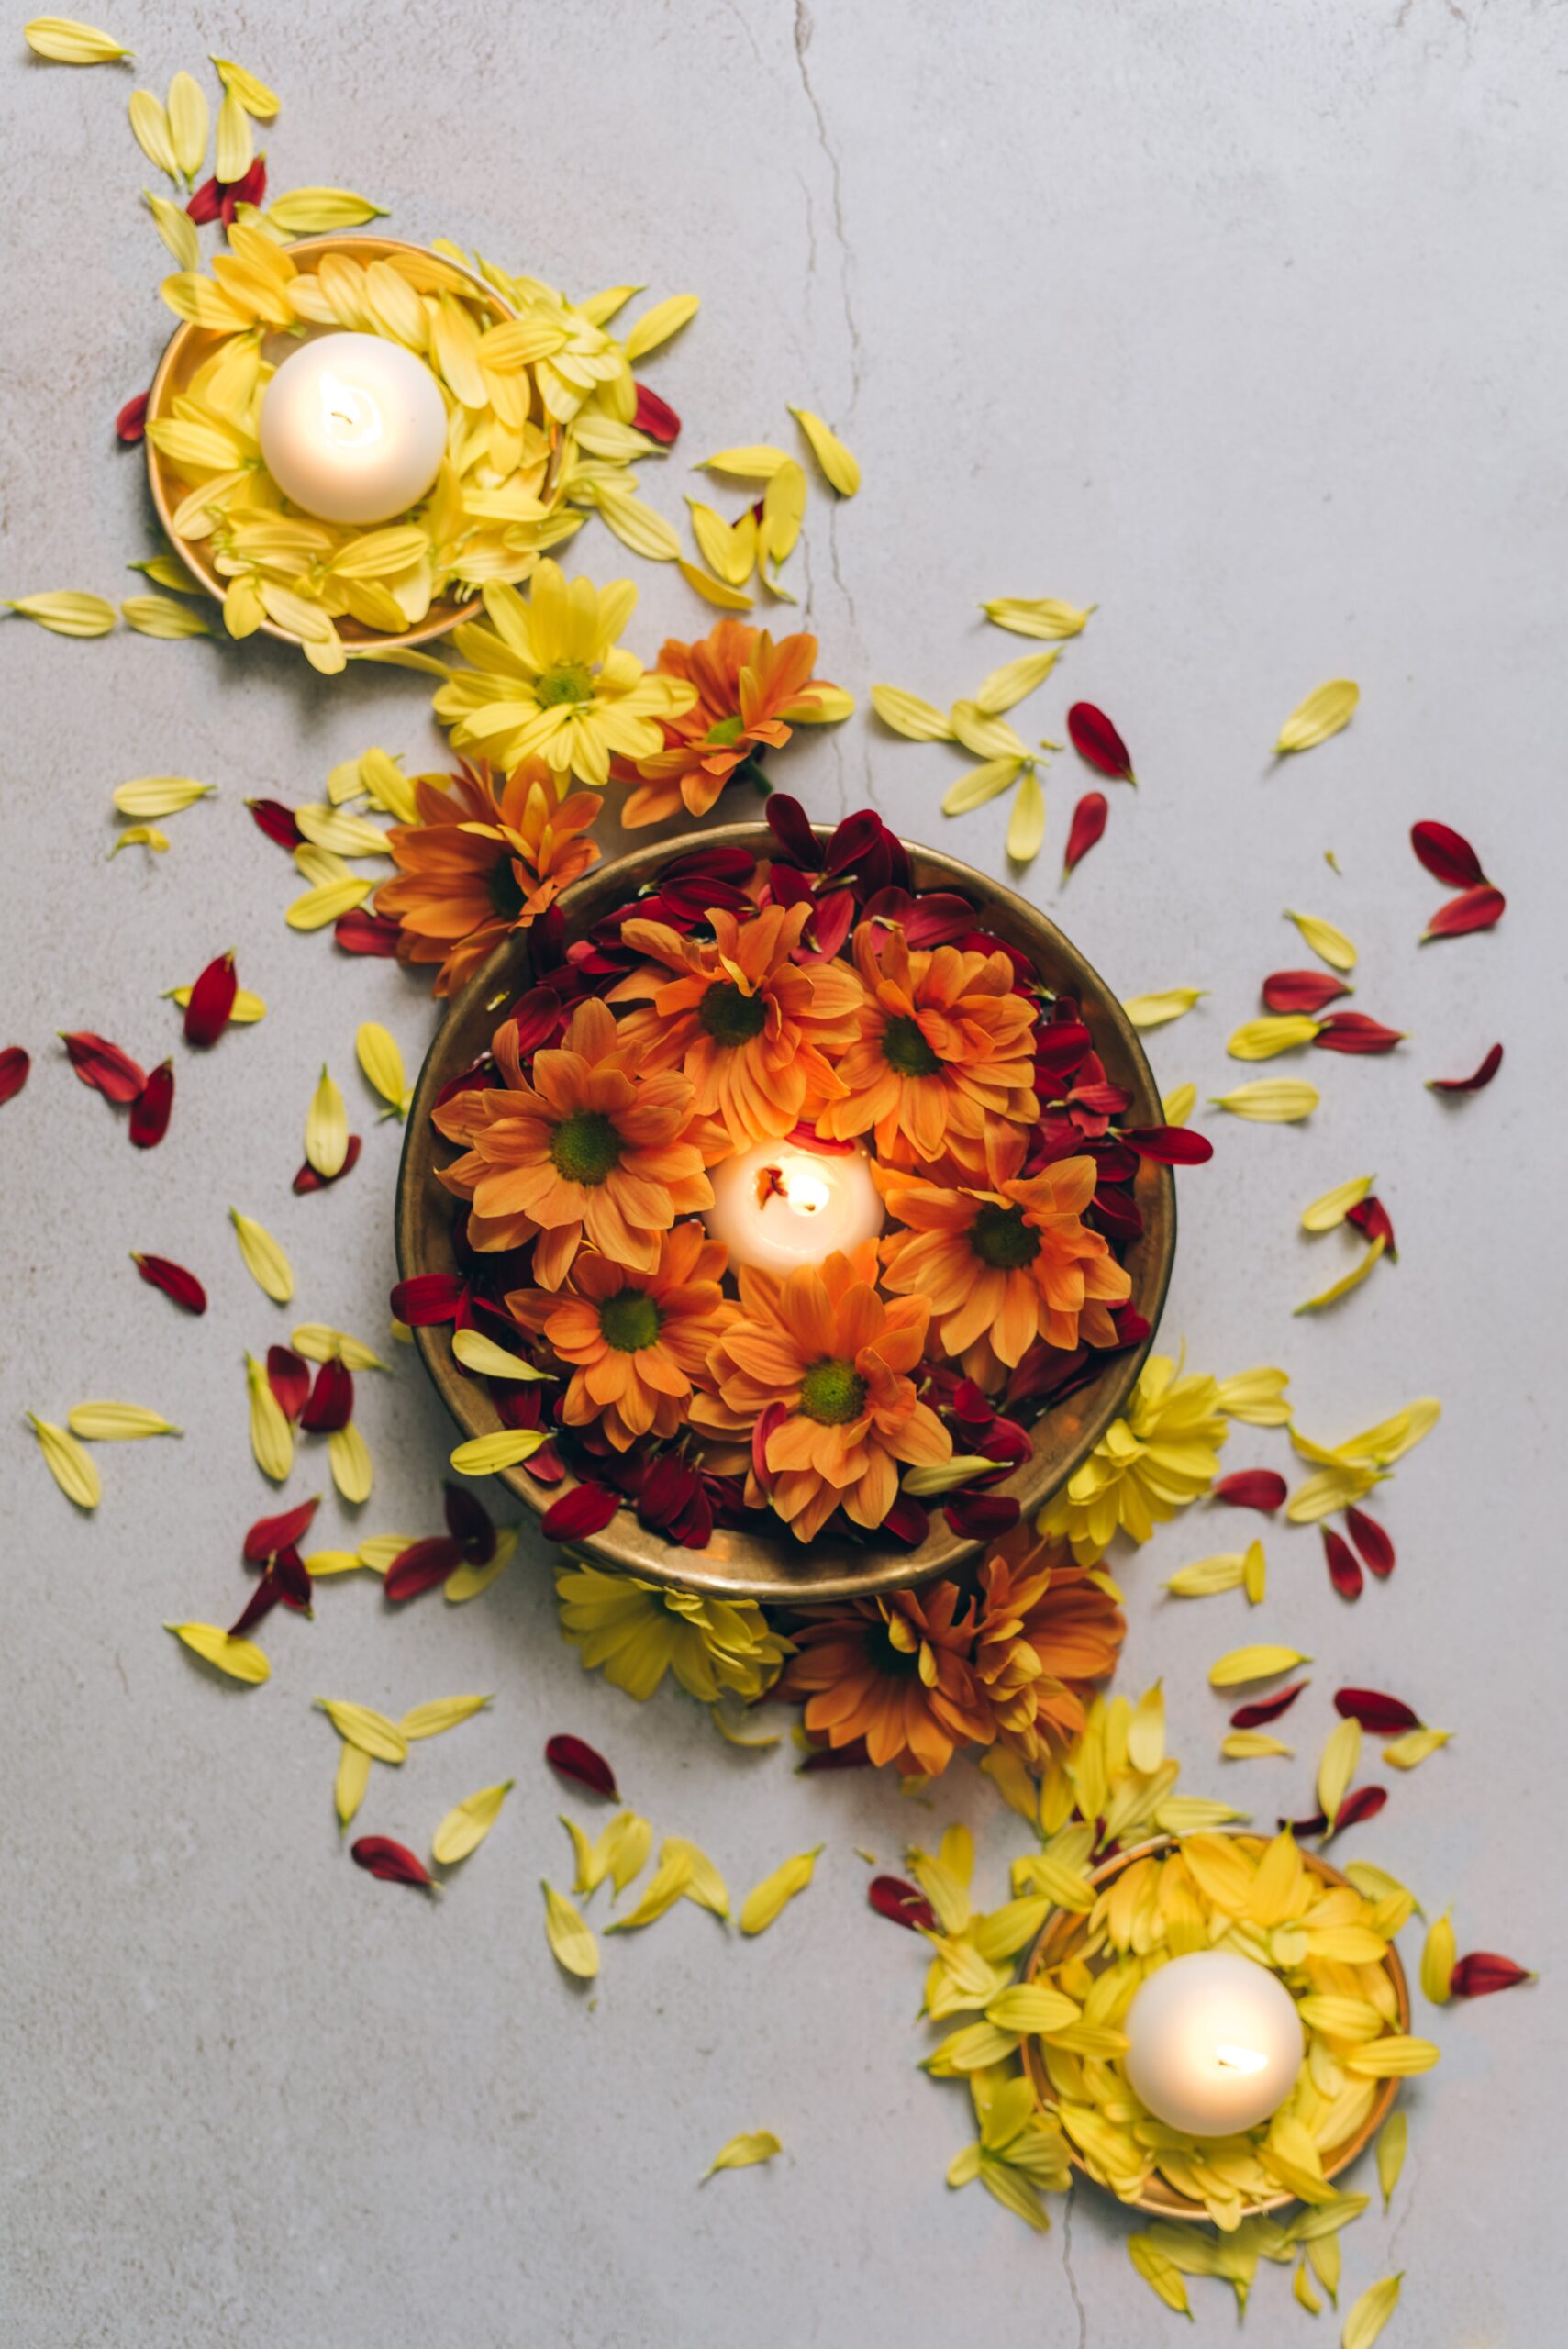 Three candles in bowls surrounded by flower petals